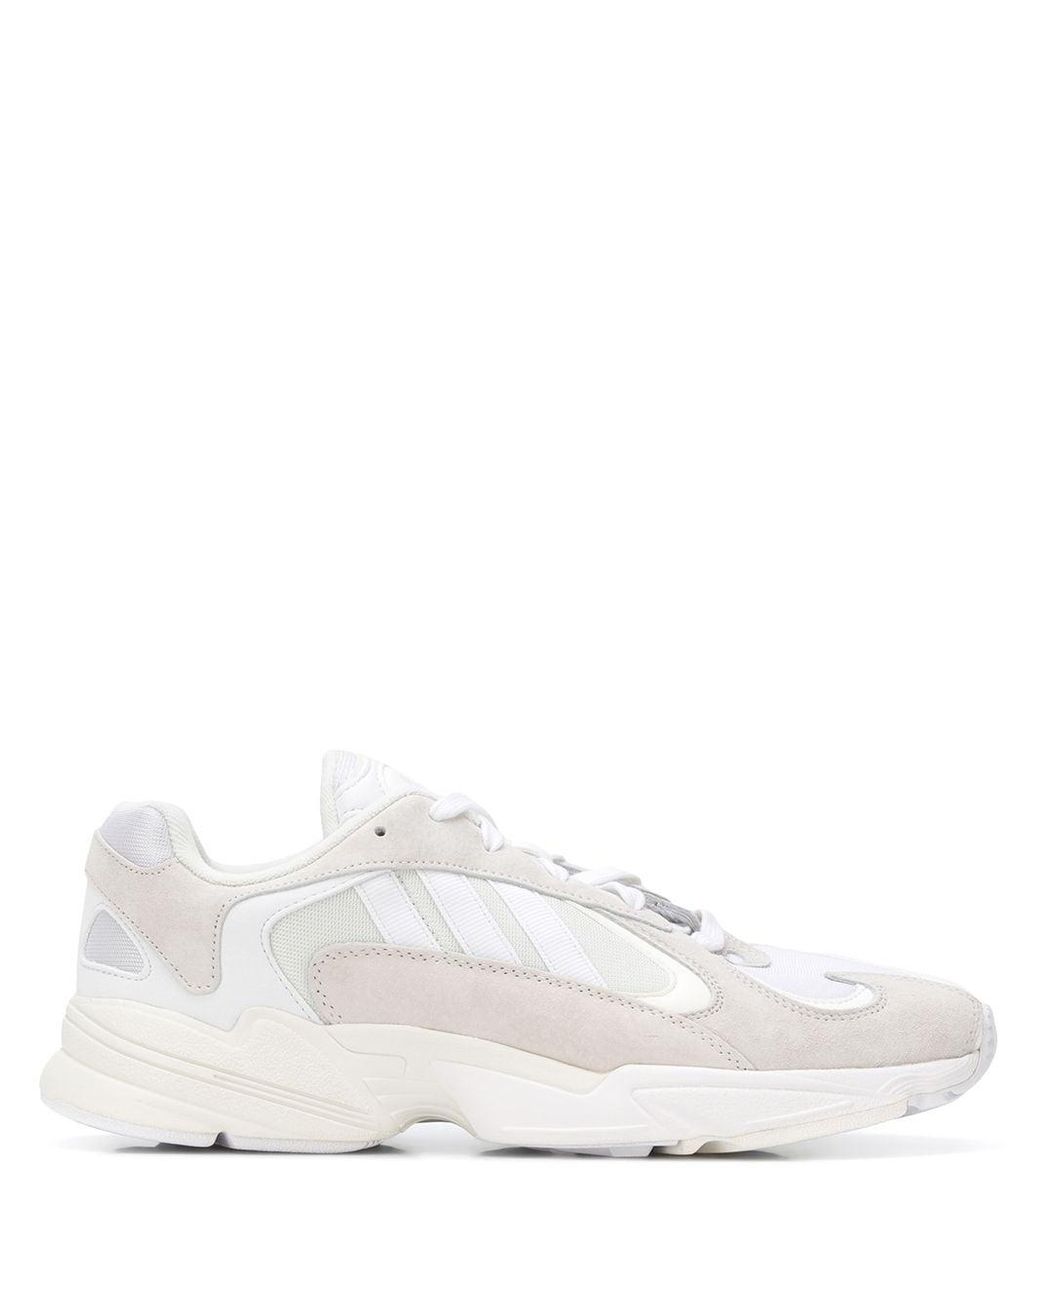 adidas yung og white leather trainers, Off 61%, www.spotsclick.com